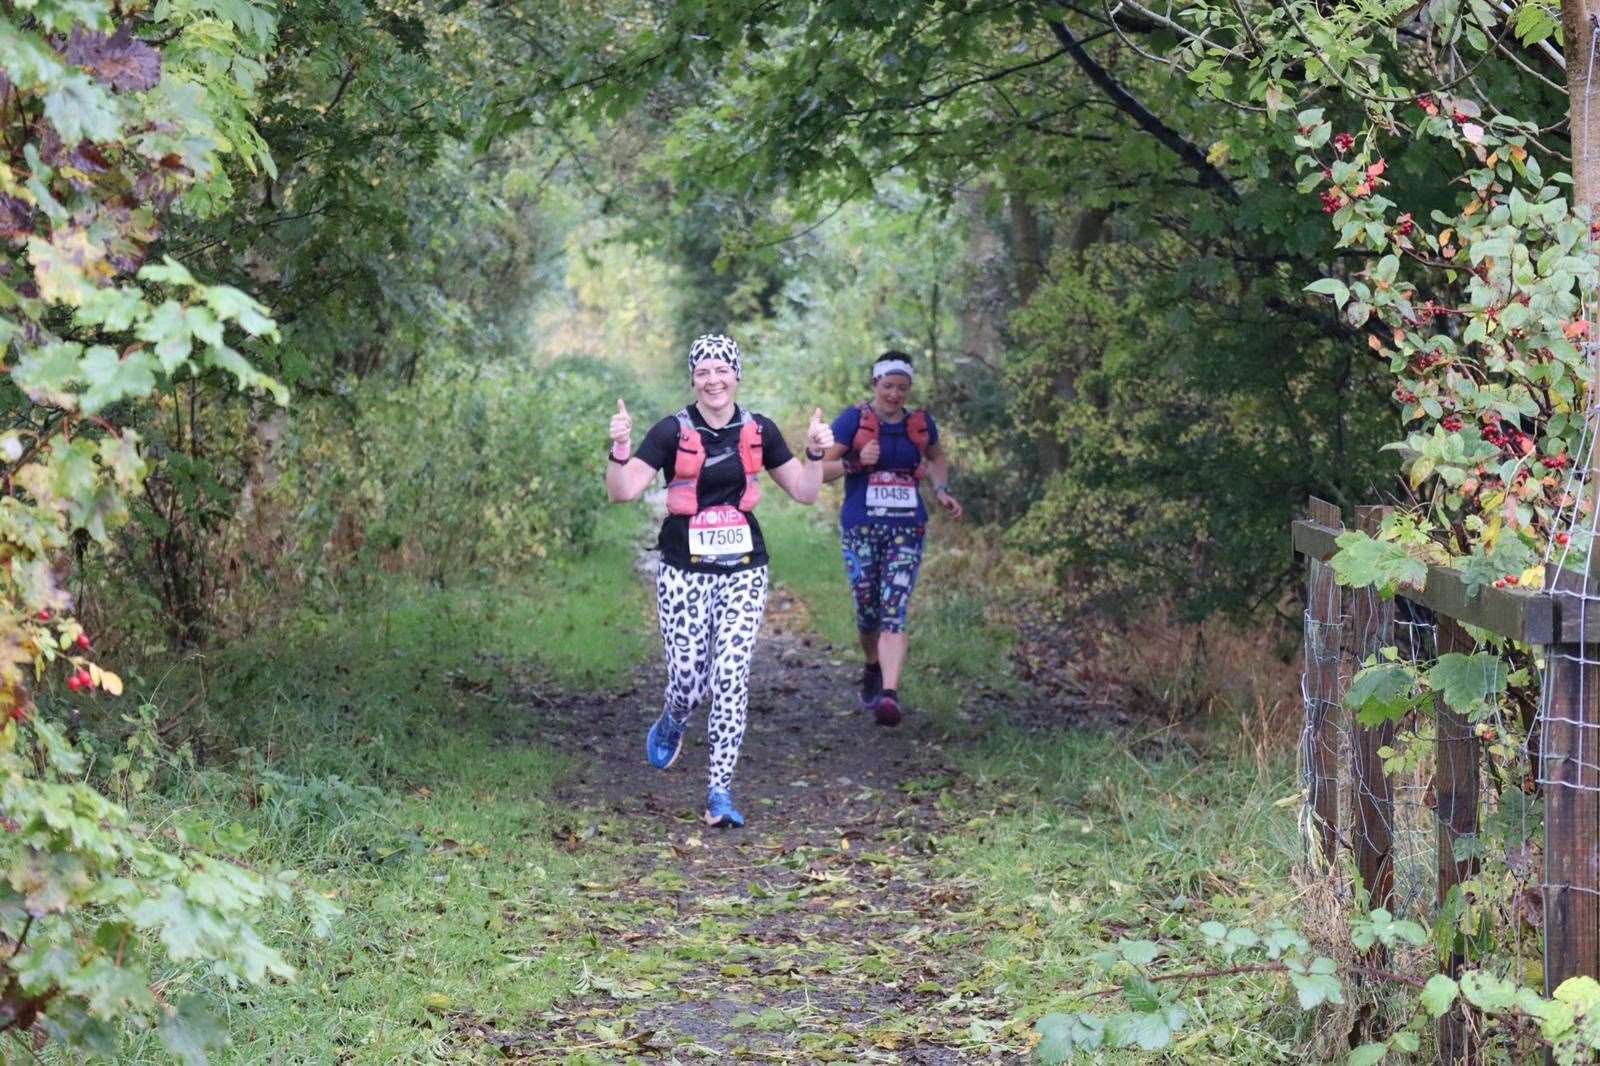 Club members Sonia McTavish and Moira Anderson took on the challenge in less than ideal conditions.